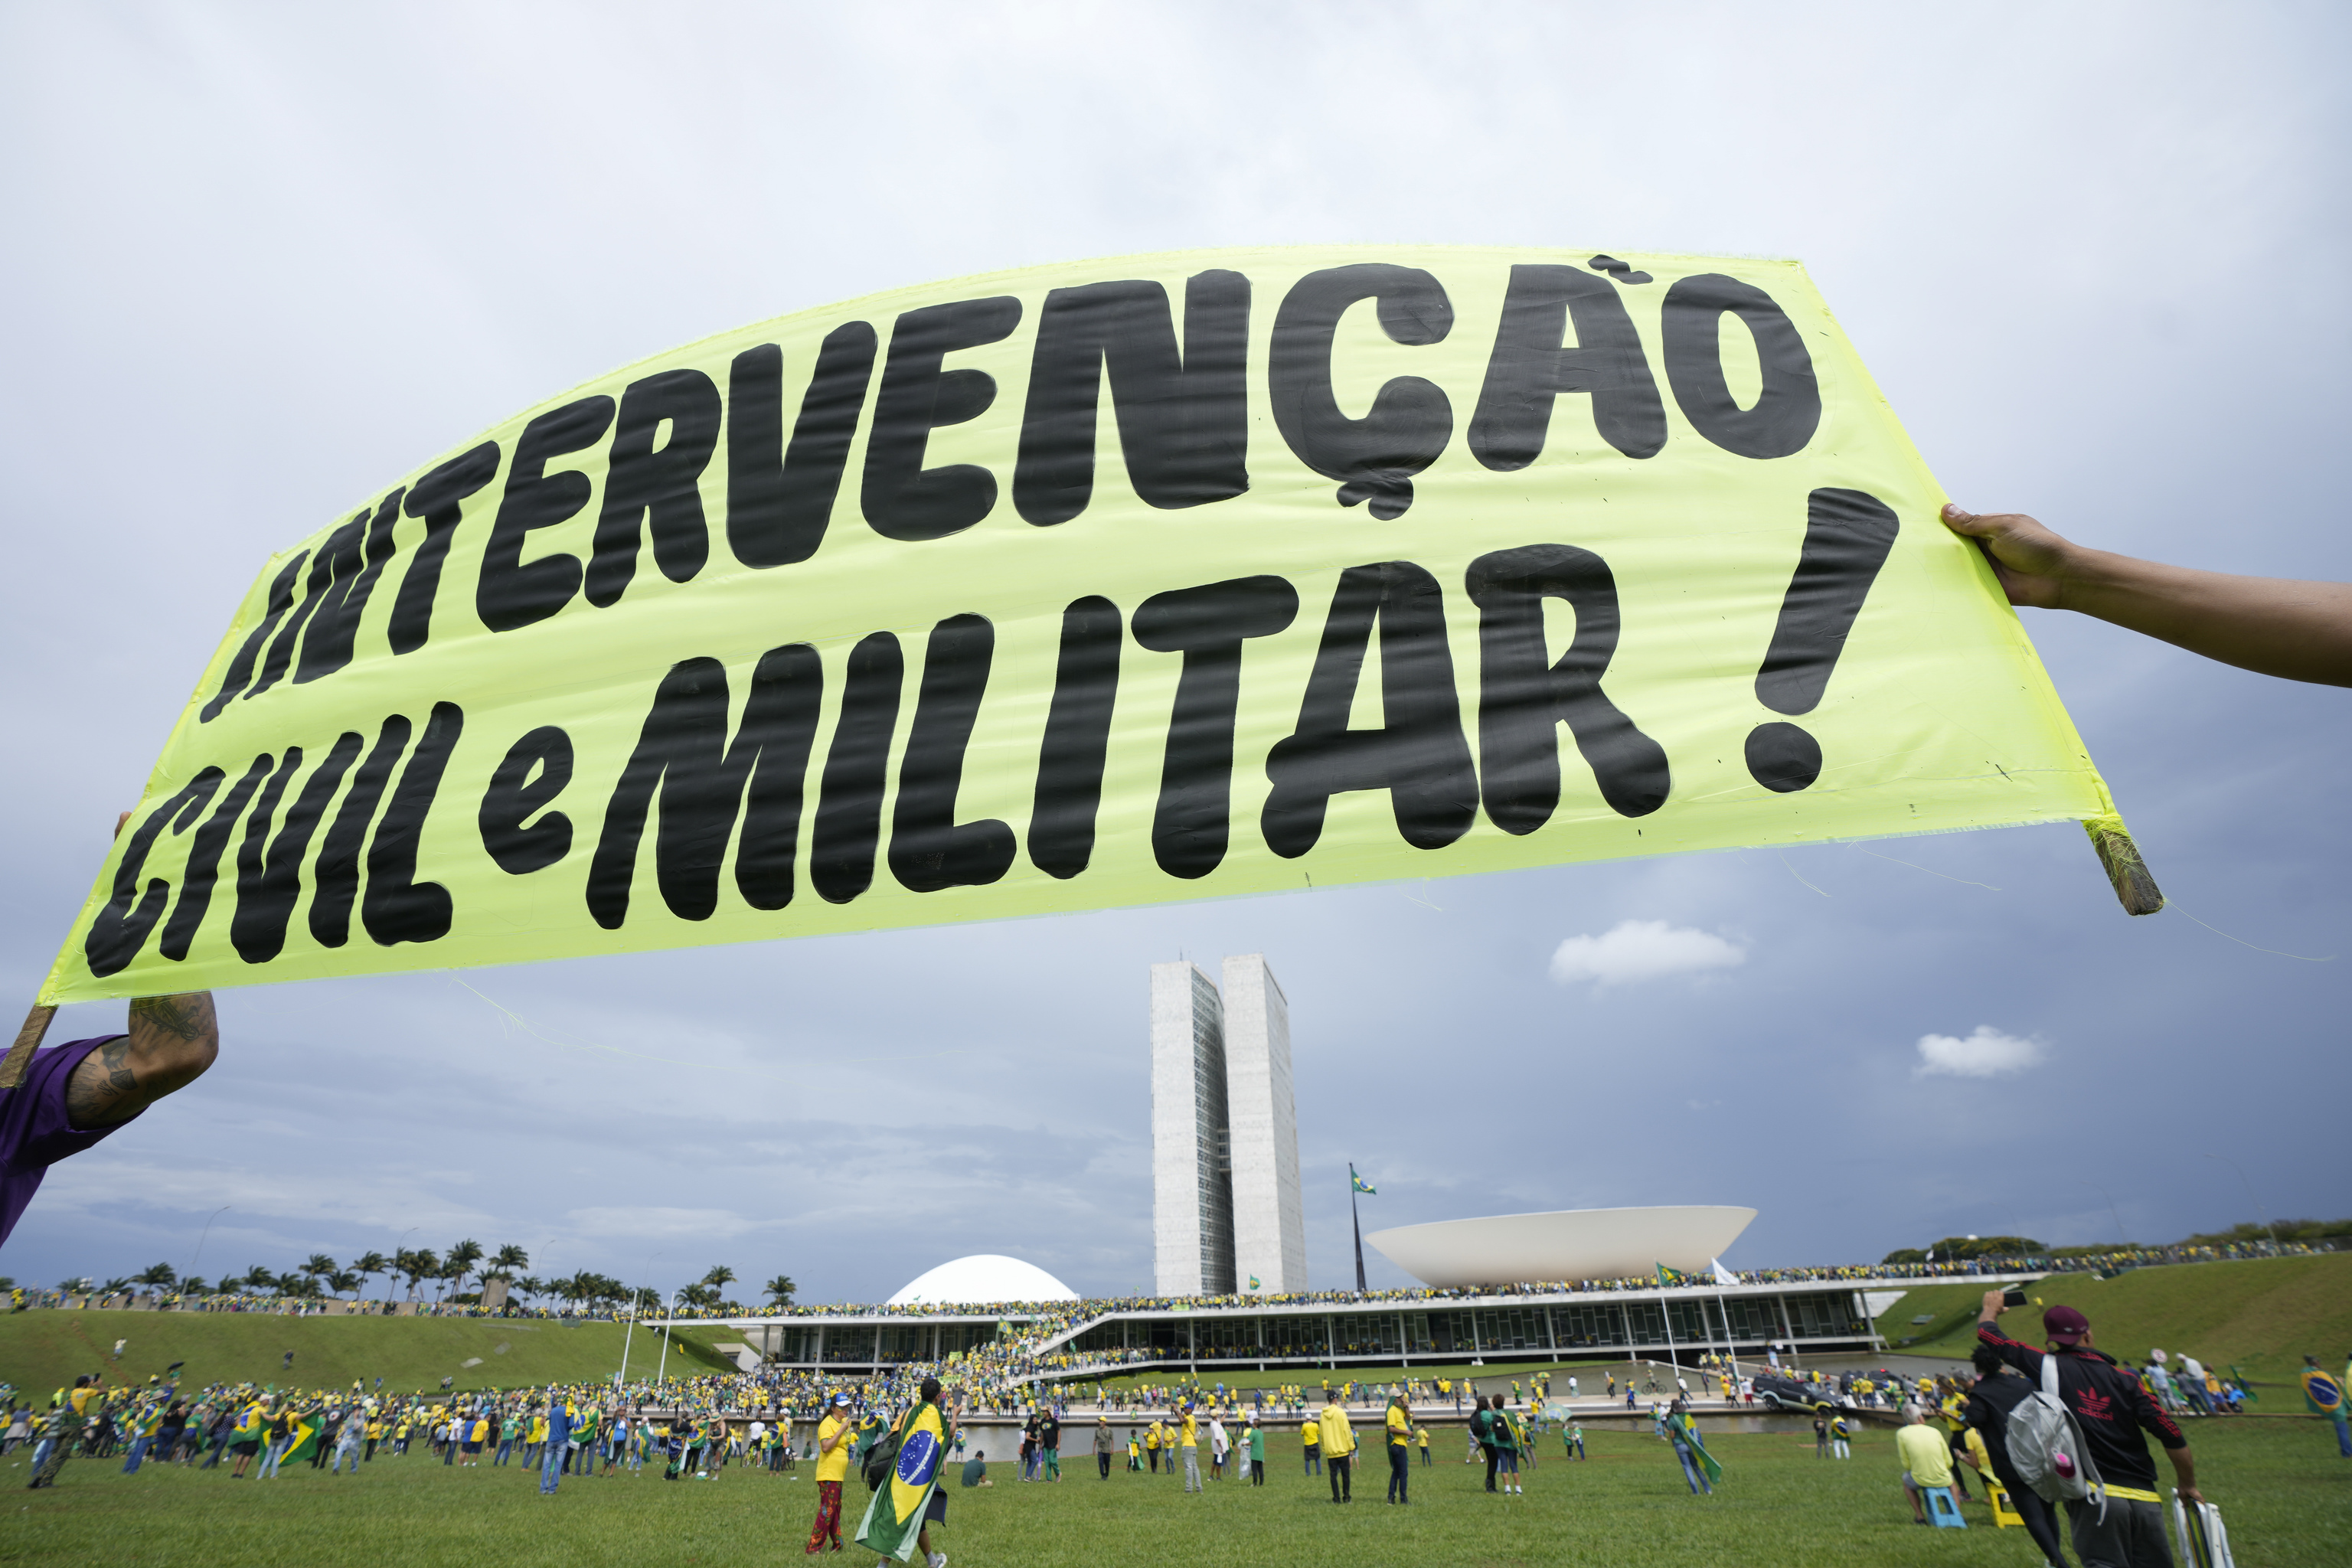 Protesters, supporters of  lt;HIT gt;Brazil lt;/HIT gt;'s former President Jair Bolsonaro, hold a banner that reads in Portuguese "Civil and Military Intervention!" as others storm the the National Congress building in Brasilia,  lt;HIT gt;Brazil lt;/HIT gt;, Sunday, Jan. 8, 2023. (AP Photo/Eraldo Peres)